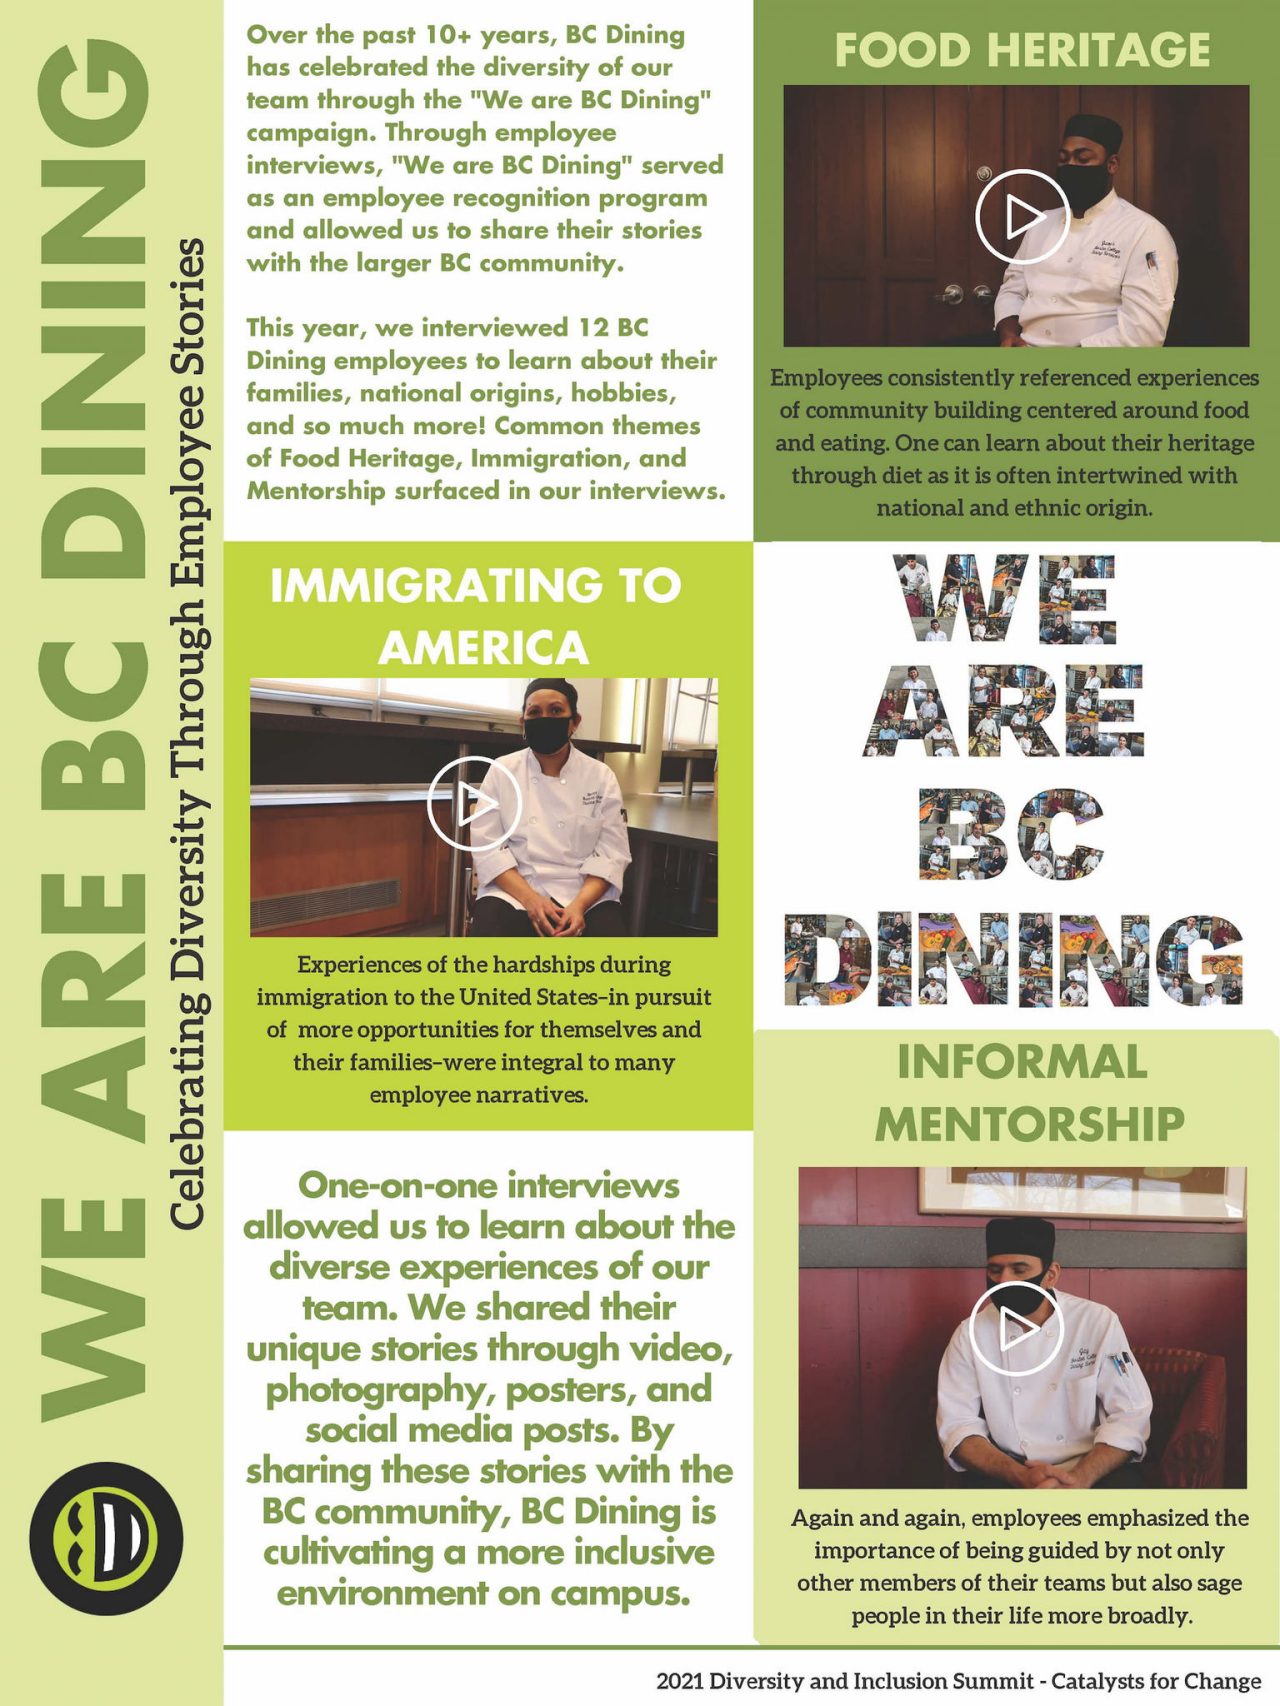 We are BC Dining Summit Poster 2021